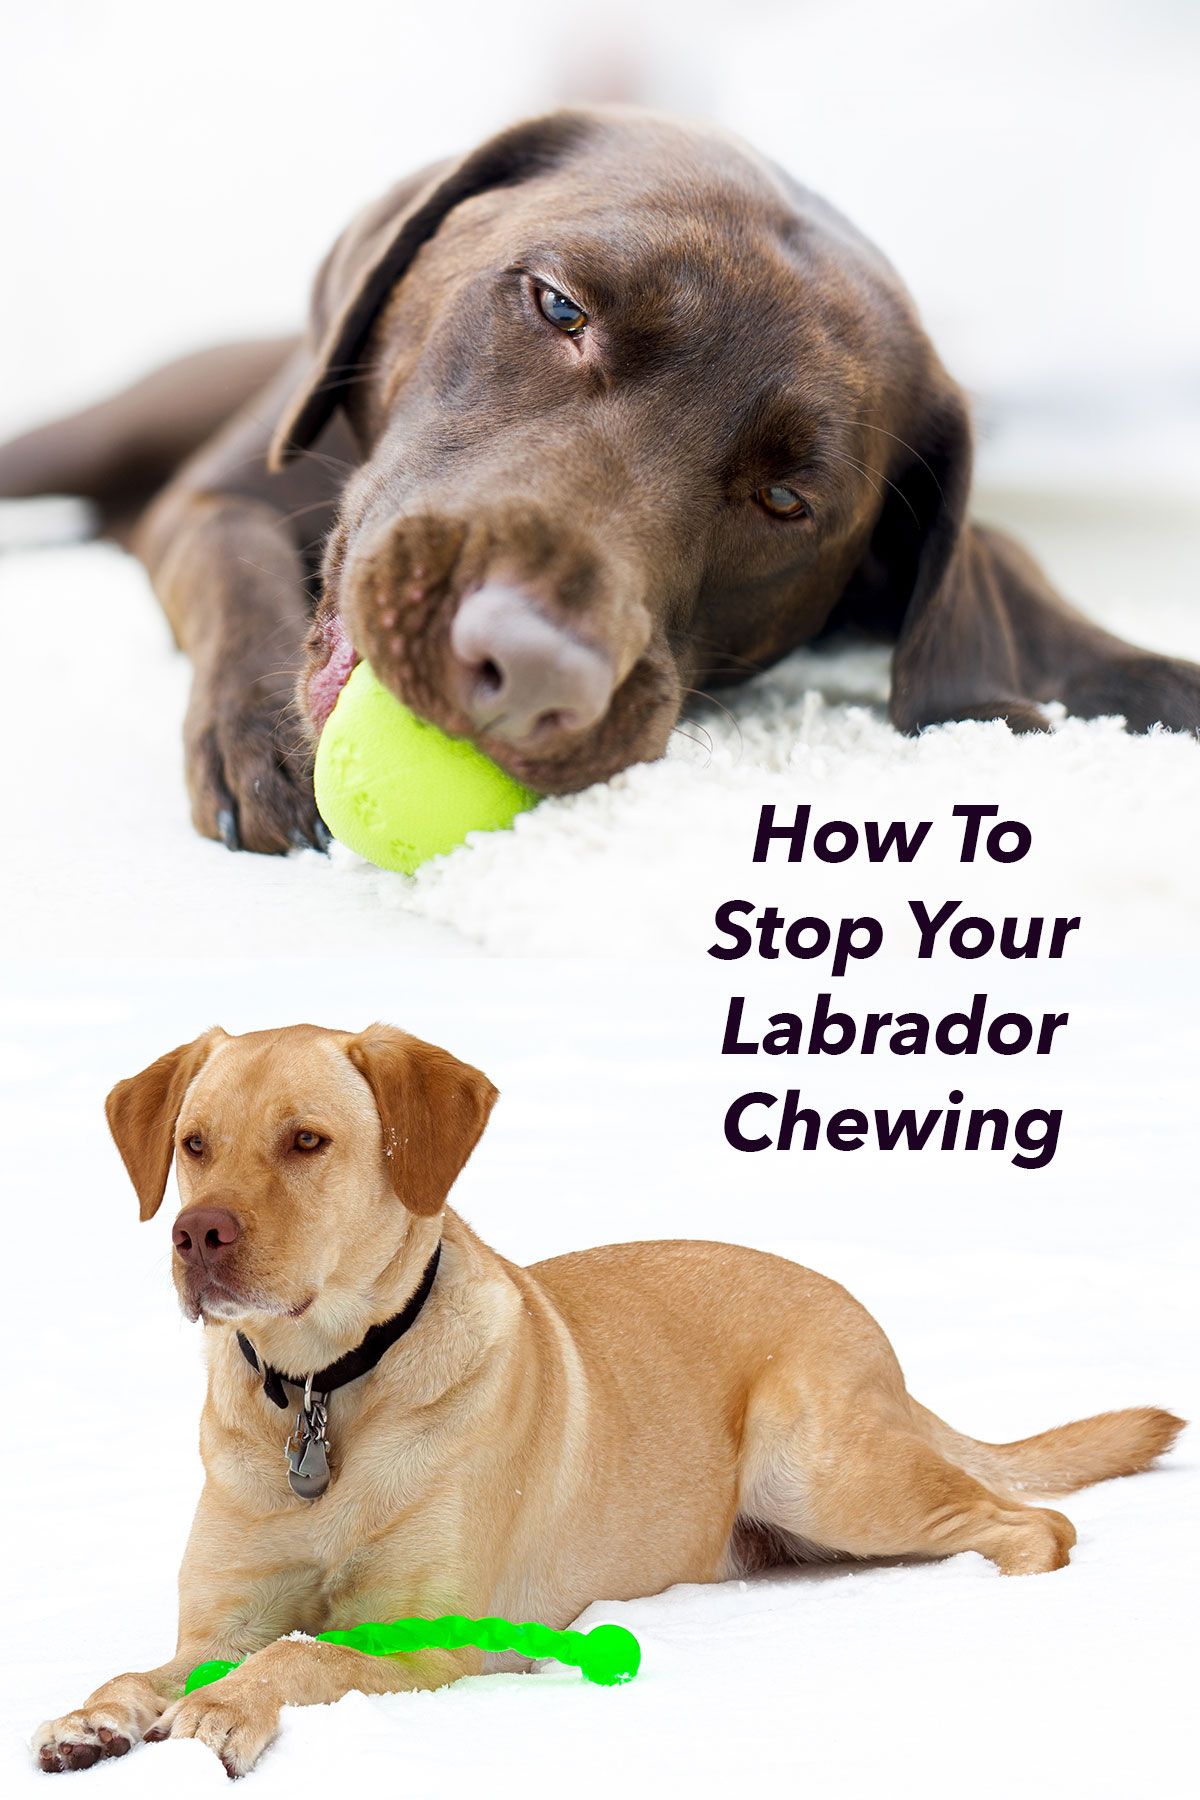 How to stop your Labrador chewing things!